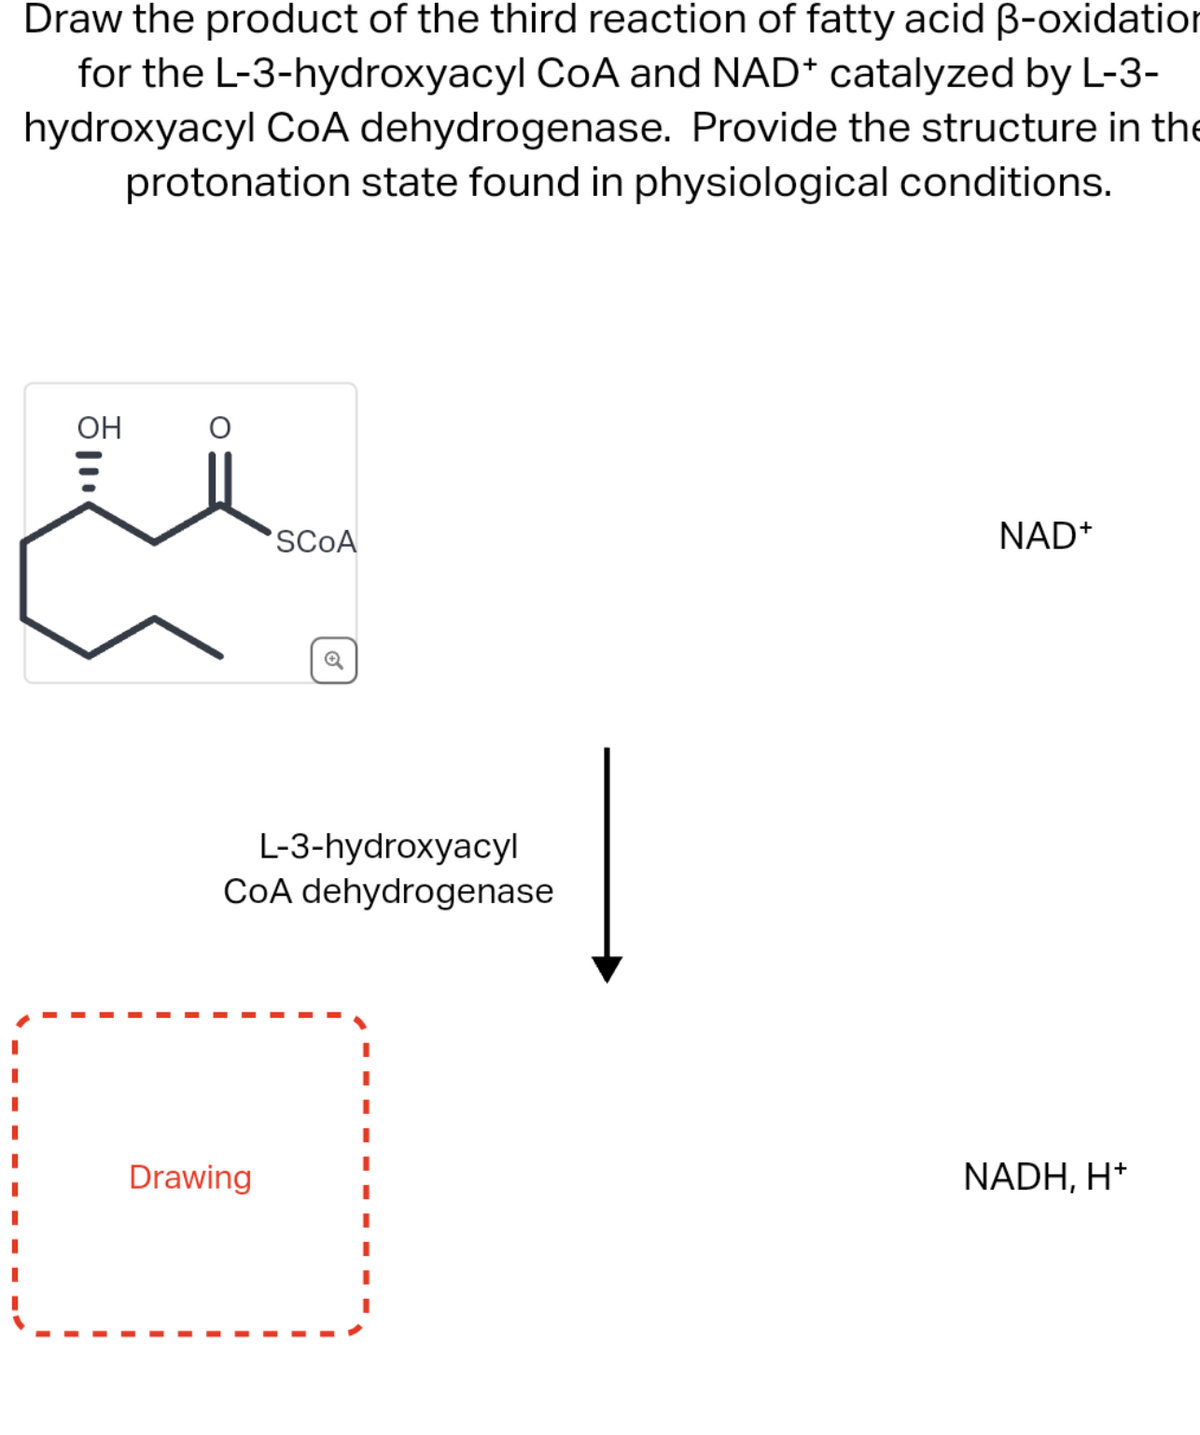 Draw the product of the third reaction of fatty acid ß-oxidation
for the L-3-hydroxyacyl CoA and NAD* catalyzed by L-3-
hydroxyacyl CoA dehydrogenase. Provide the structure in the
protonation state found in physiological conditions.
ㅎ...
OH
O
SCOA
L-3-hydroxyacyl
CoA dehydrogenase
Drawing
NAD+
NADH, H+